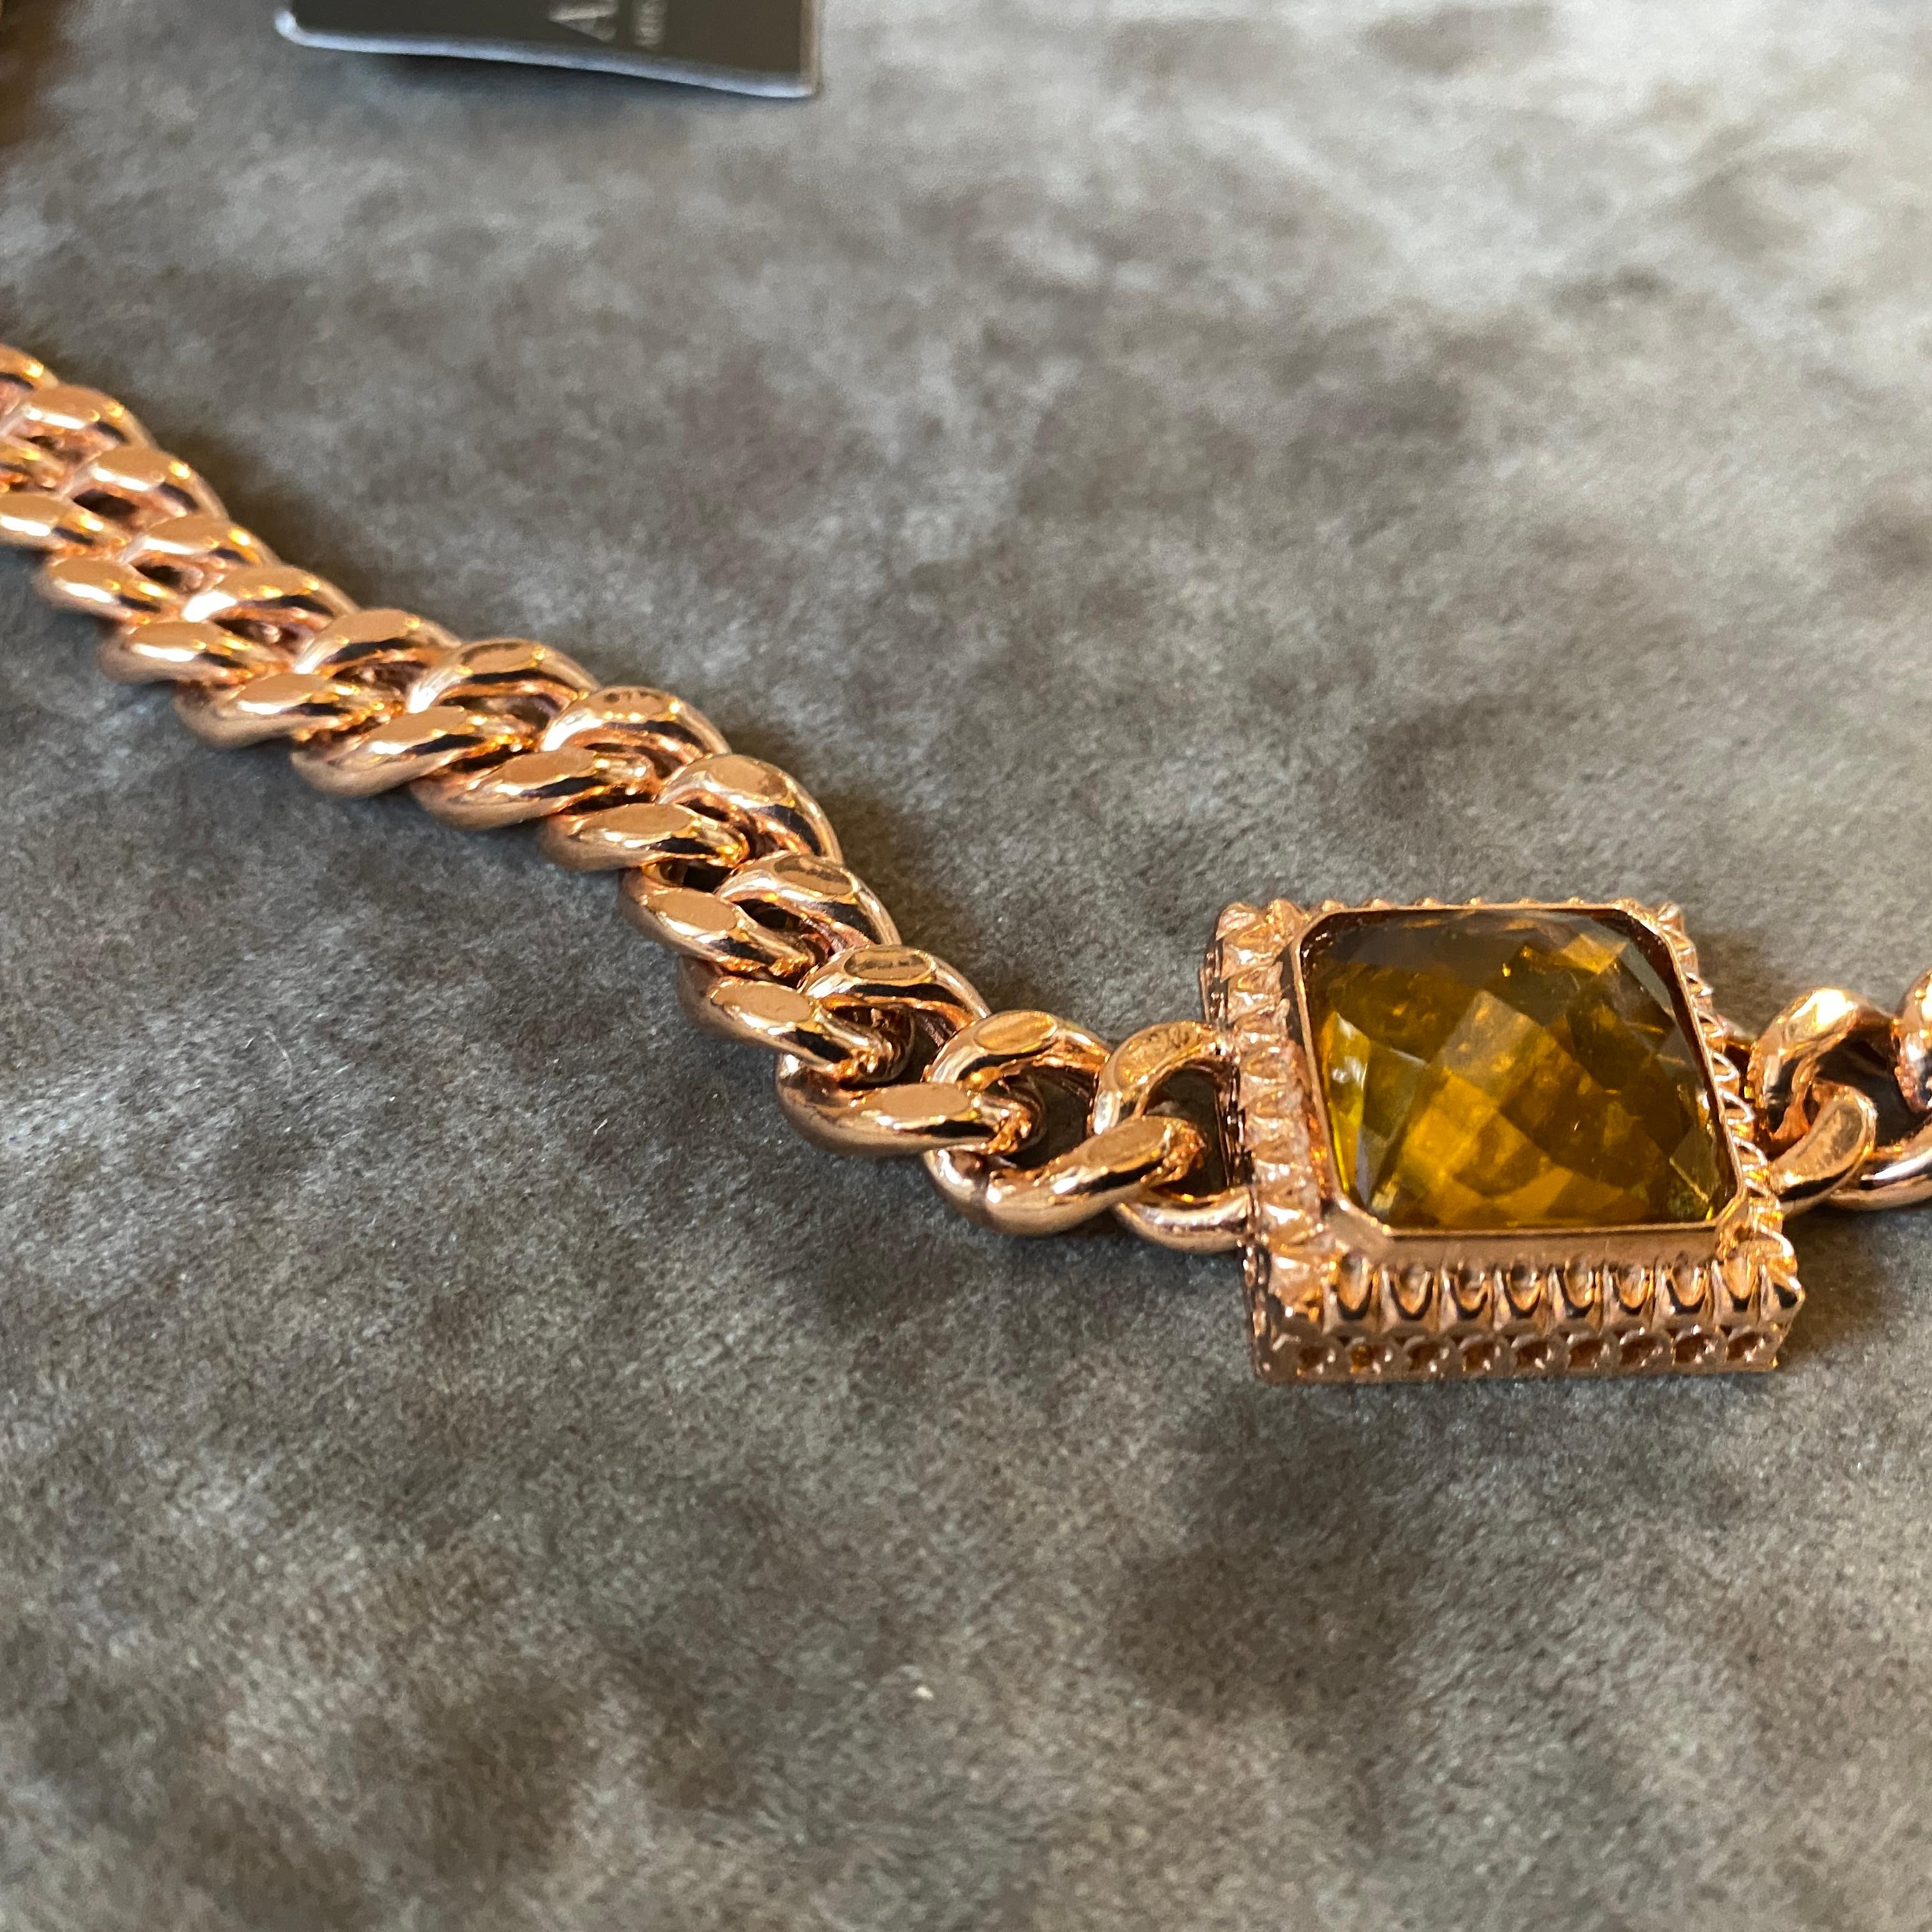 A never worn stylish necklace totally hand-crafted in Italy in the Nineties, it's never worn. The gilded sterling silver and the square briolé hydro termal citrine quartz are in perfect conditions.